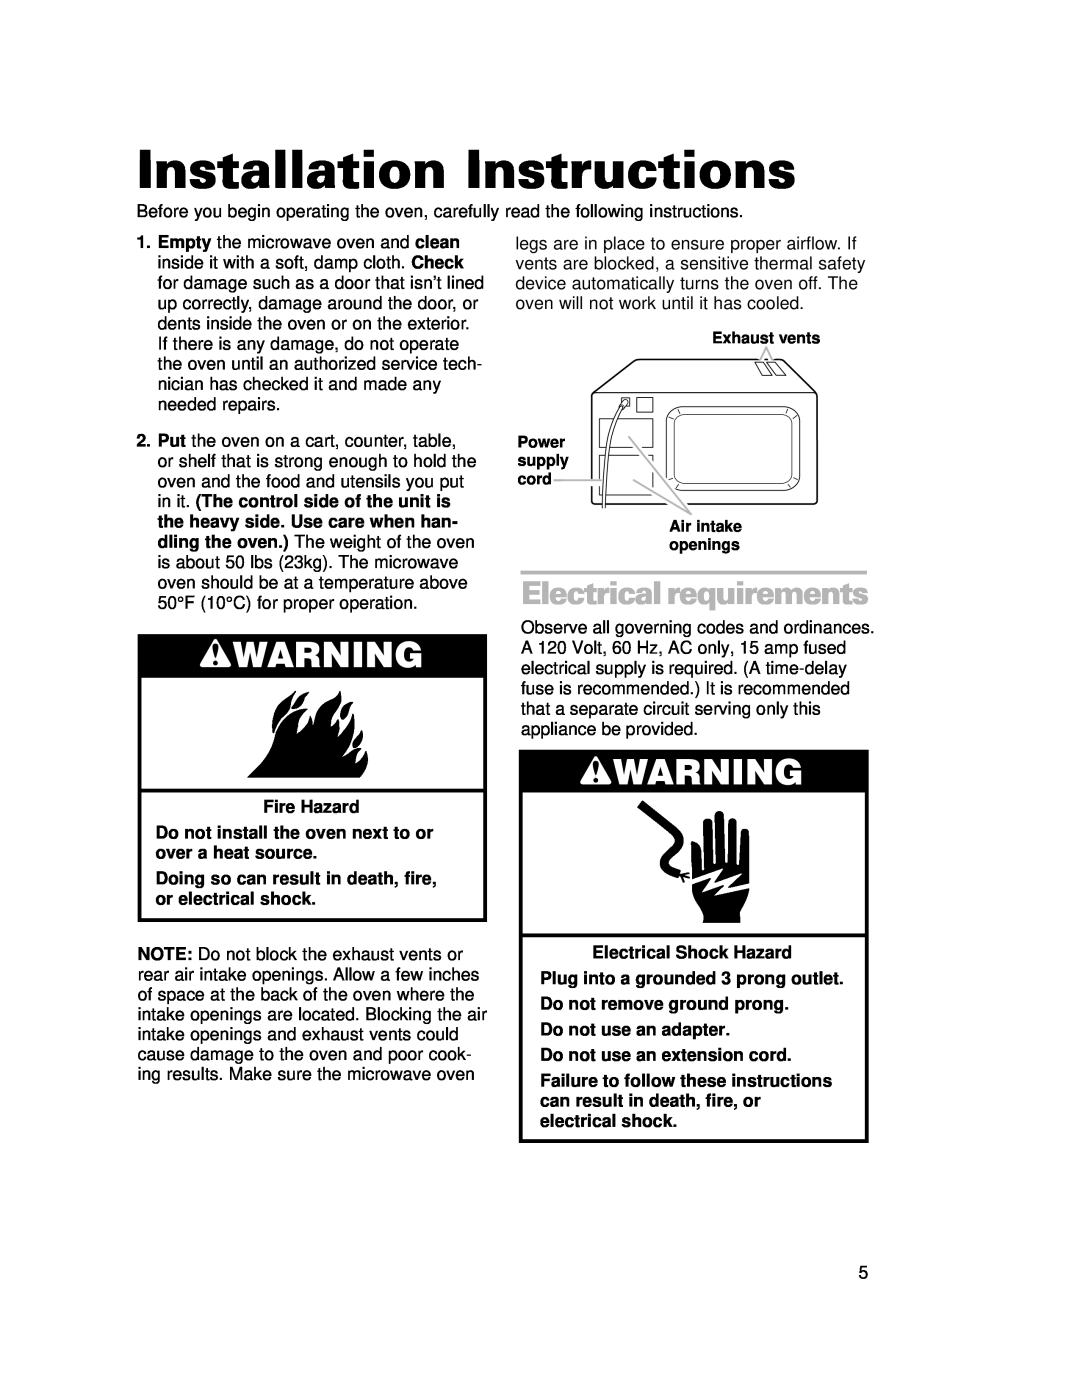 Whirlpool CMT102SG installation instructions Installation Instructions, wWARNING, Electrical requirements 